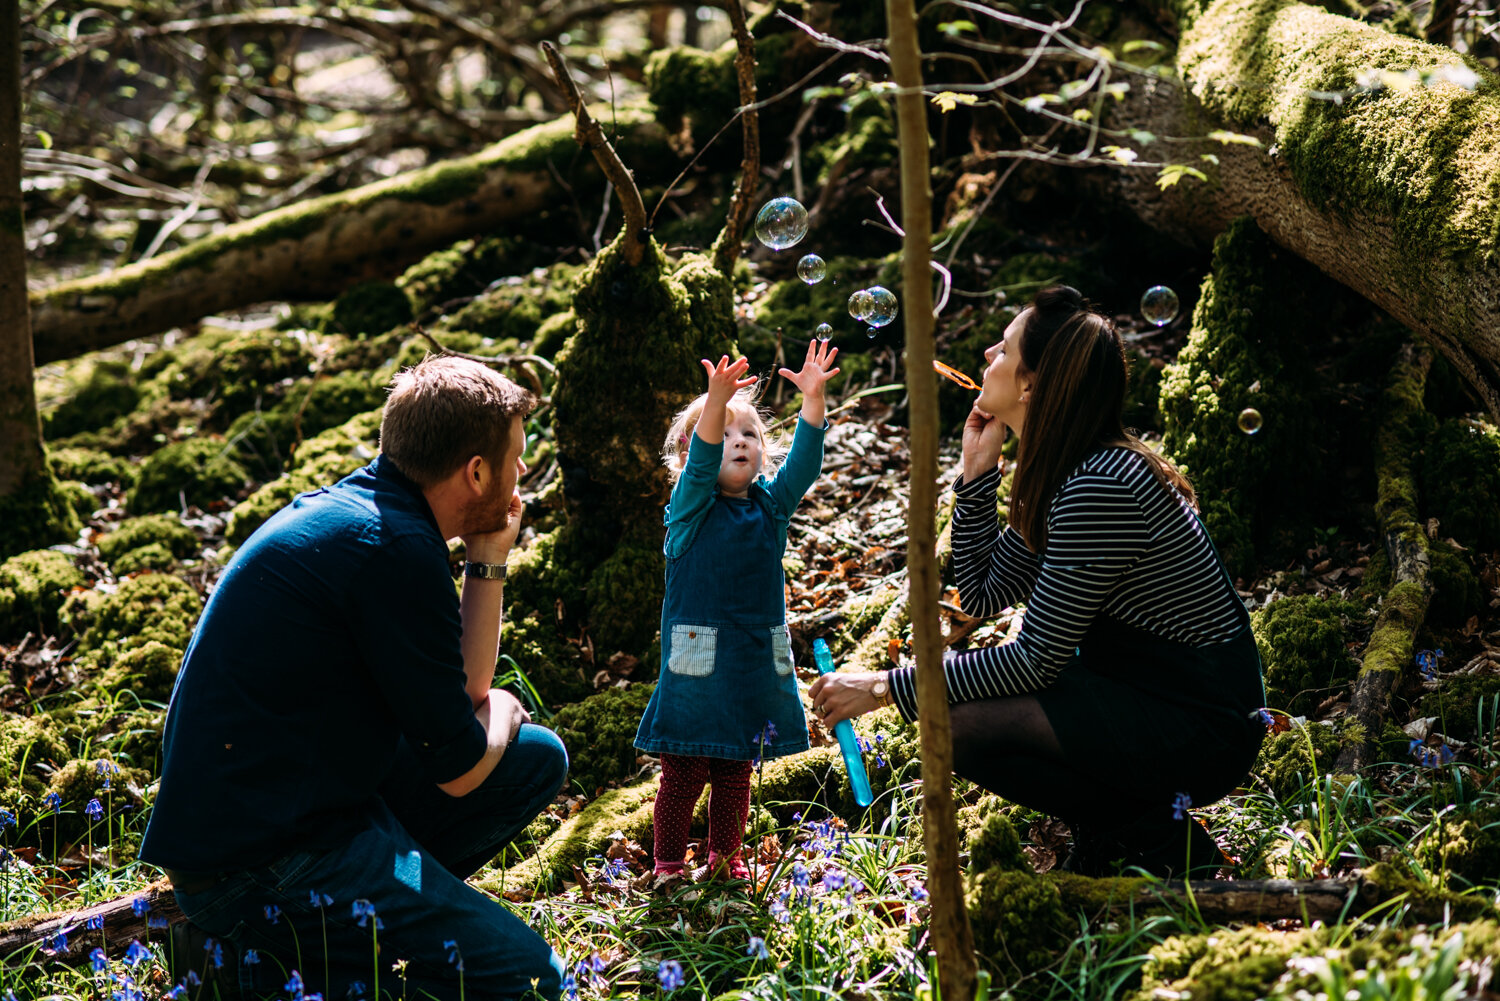  A little girl reaches up to touch bubbles her mother is blowing as the family sit amongs bluebells in a wood near Bath Somerset for this relaxed, unposed family photoshoot in Bath, Somerset. 